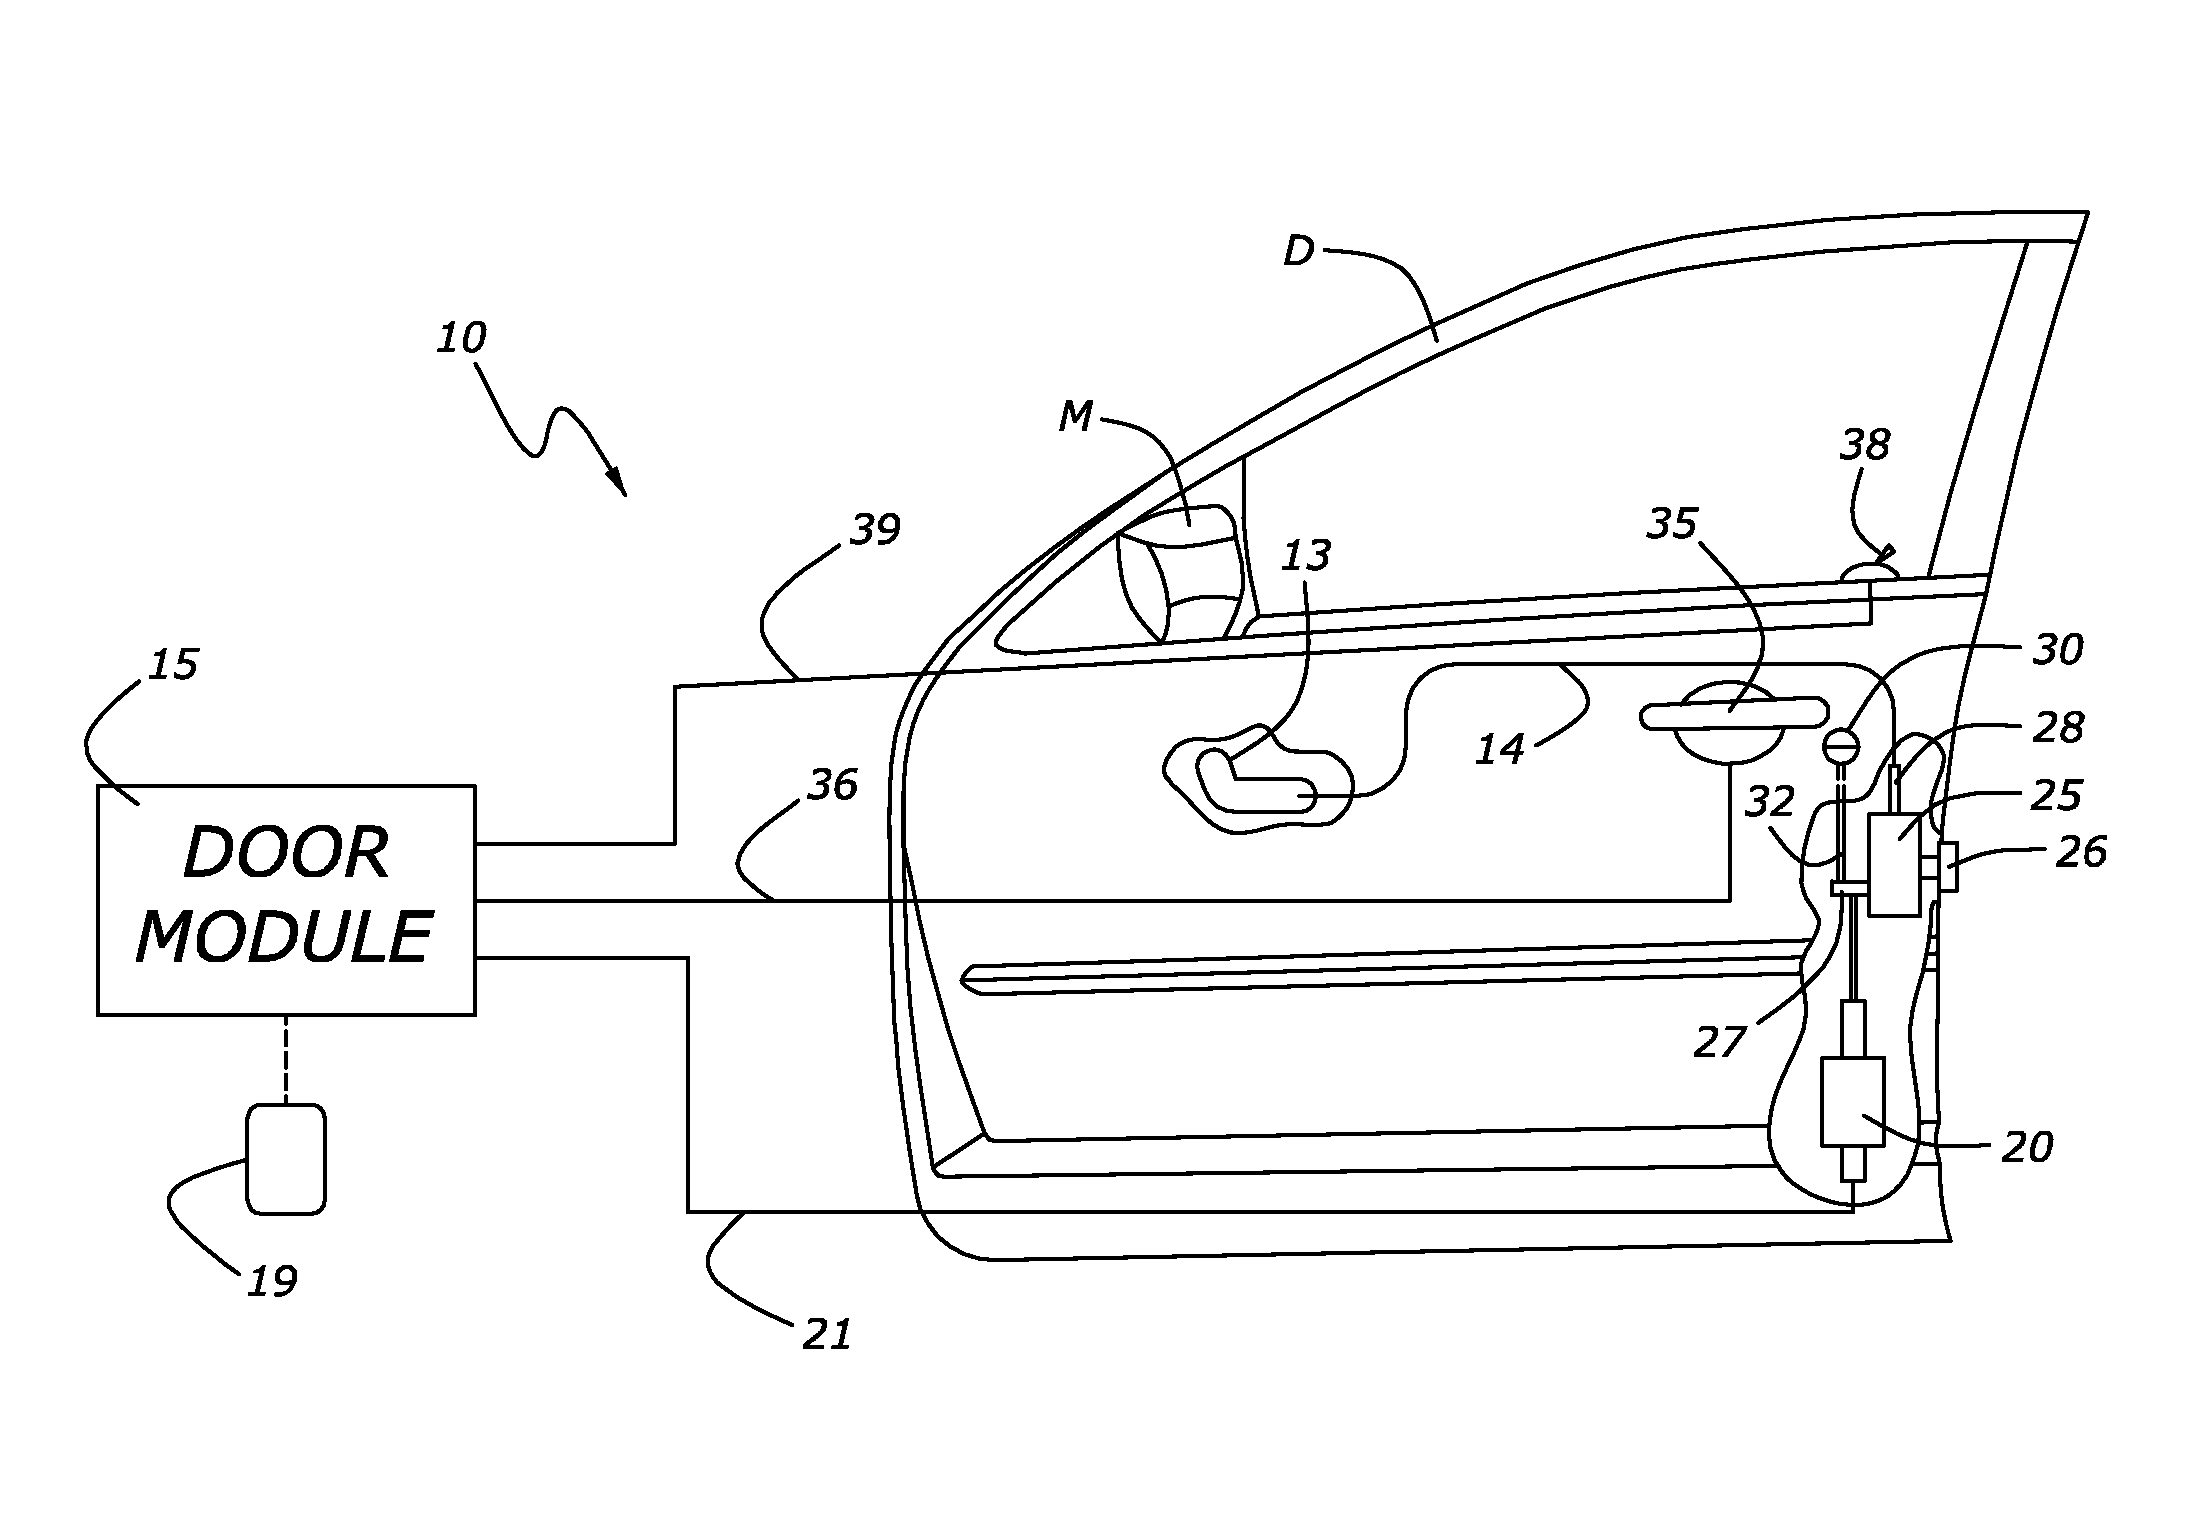 Passive Entry System for Automotive Vehicle Doors